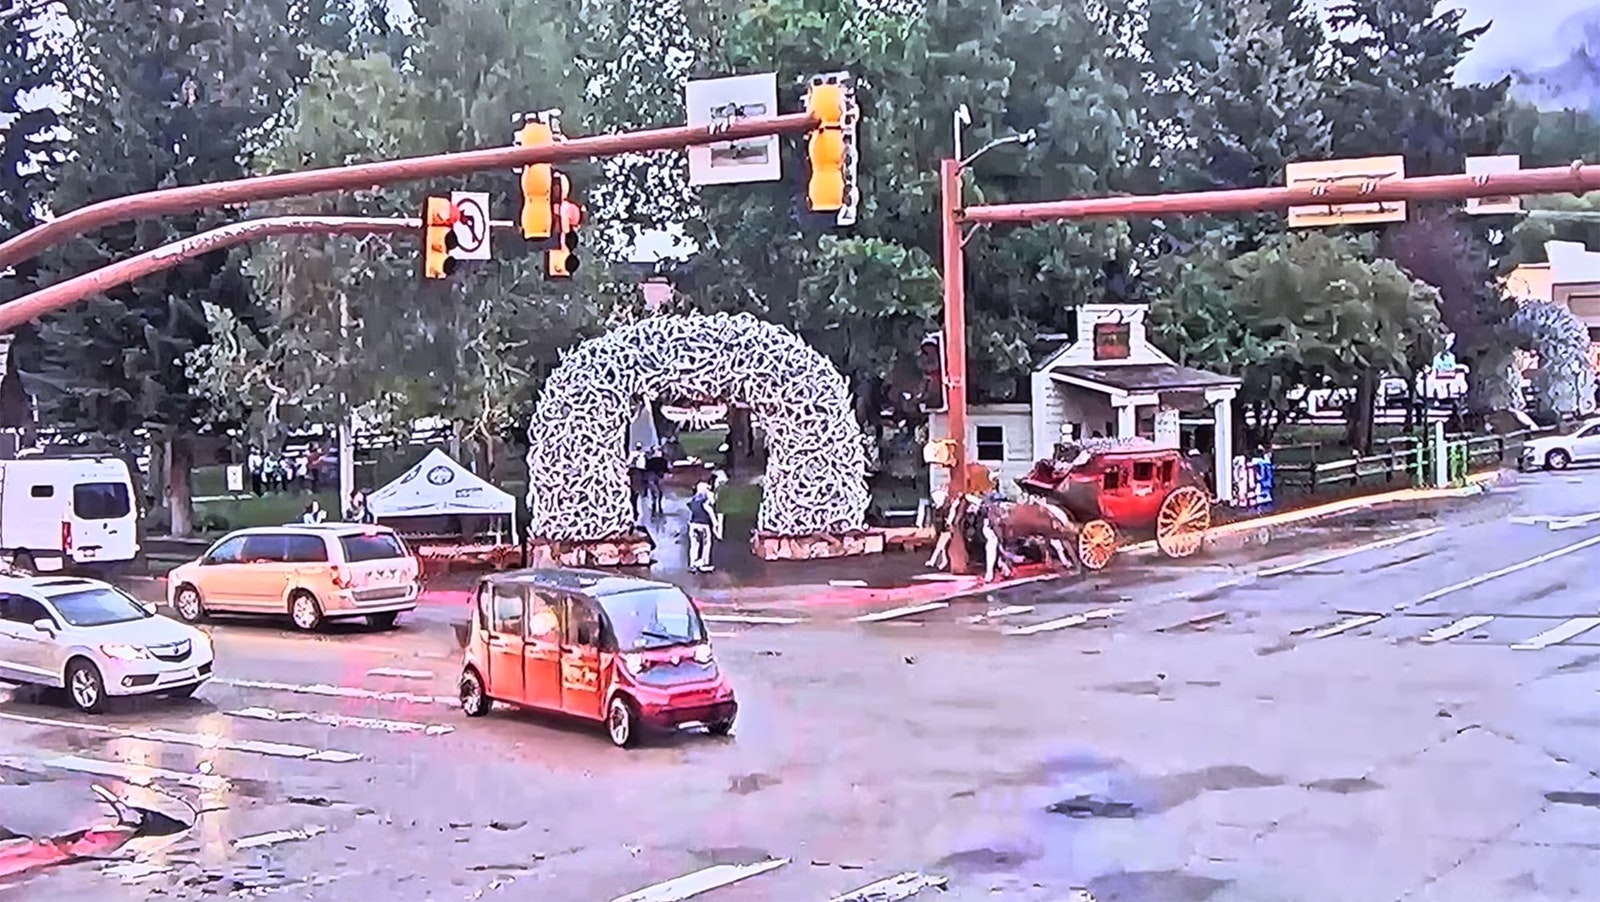 This screen grab from a live video feed at SeeJH.com shows a team of horses pulling a stagecoach barreling into a light pole in downtown Jackson, Wyoming.